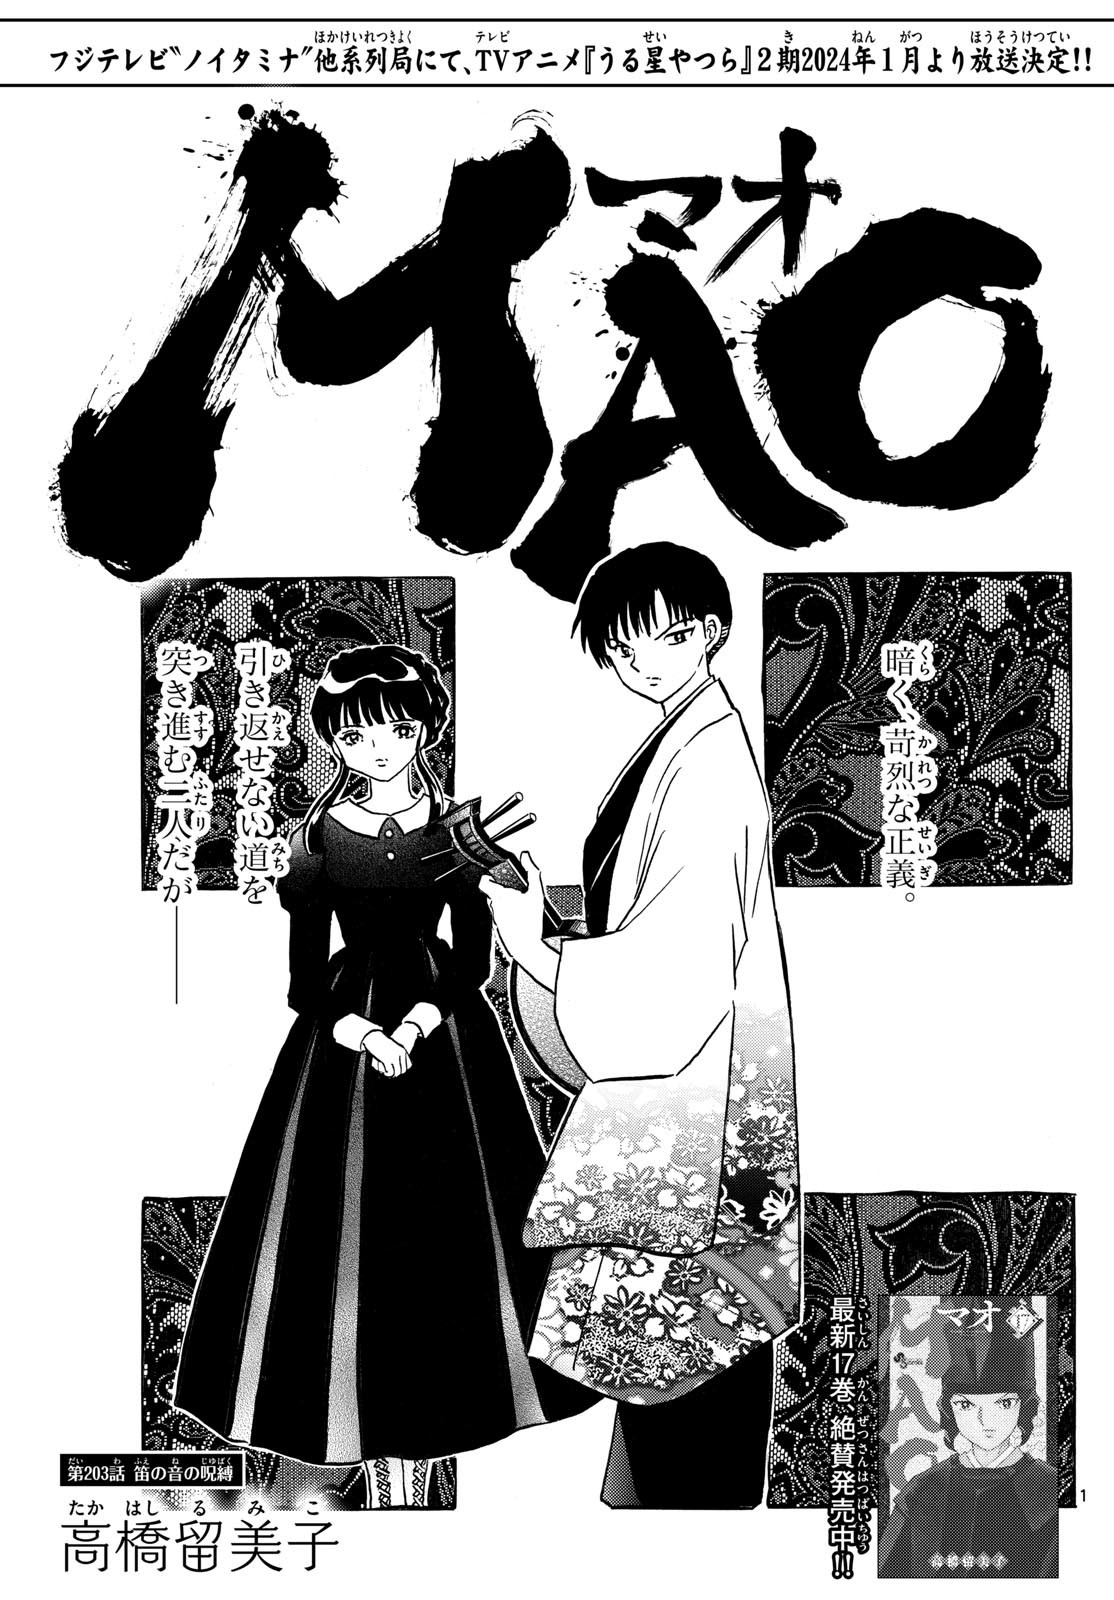 MAO - Chapter 203 - Page 1